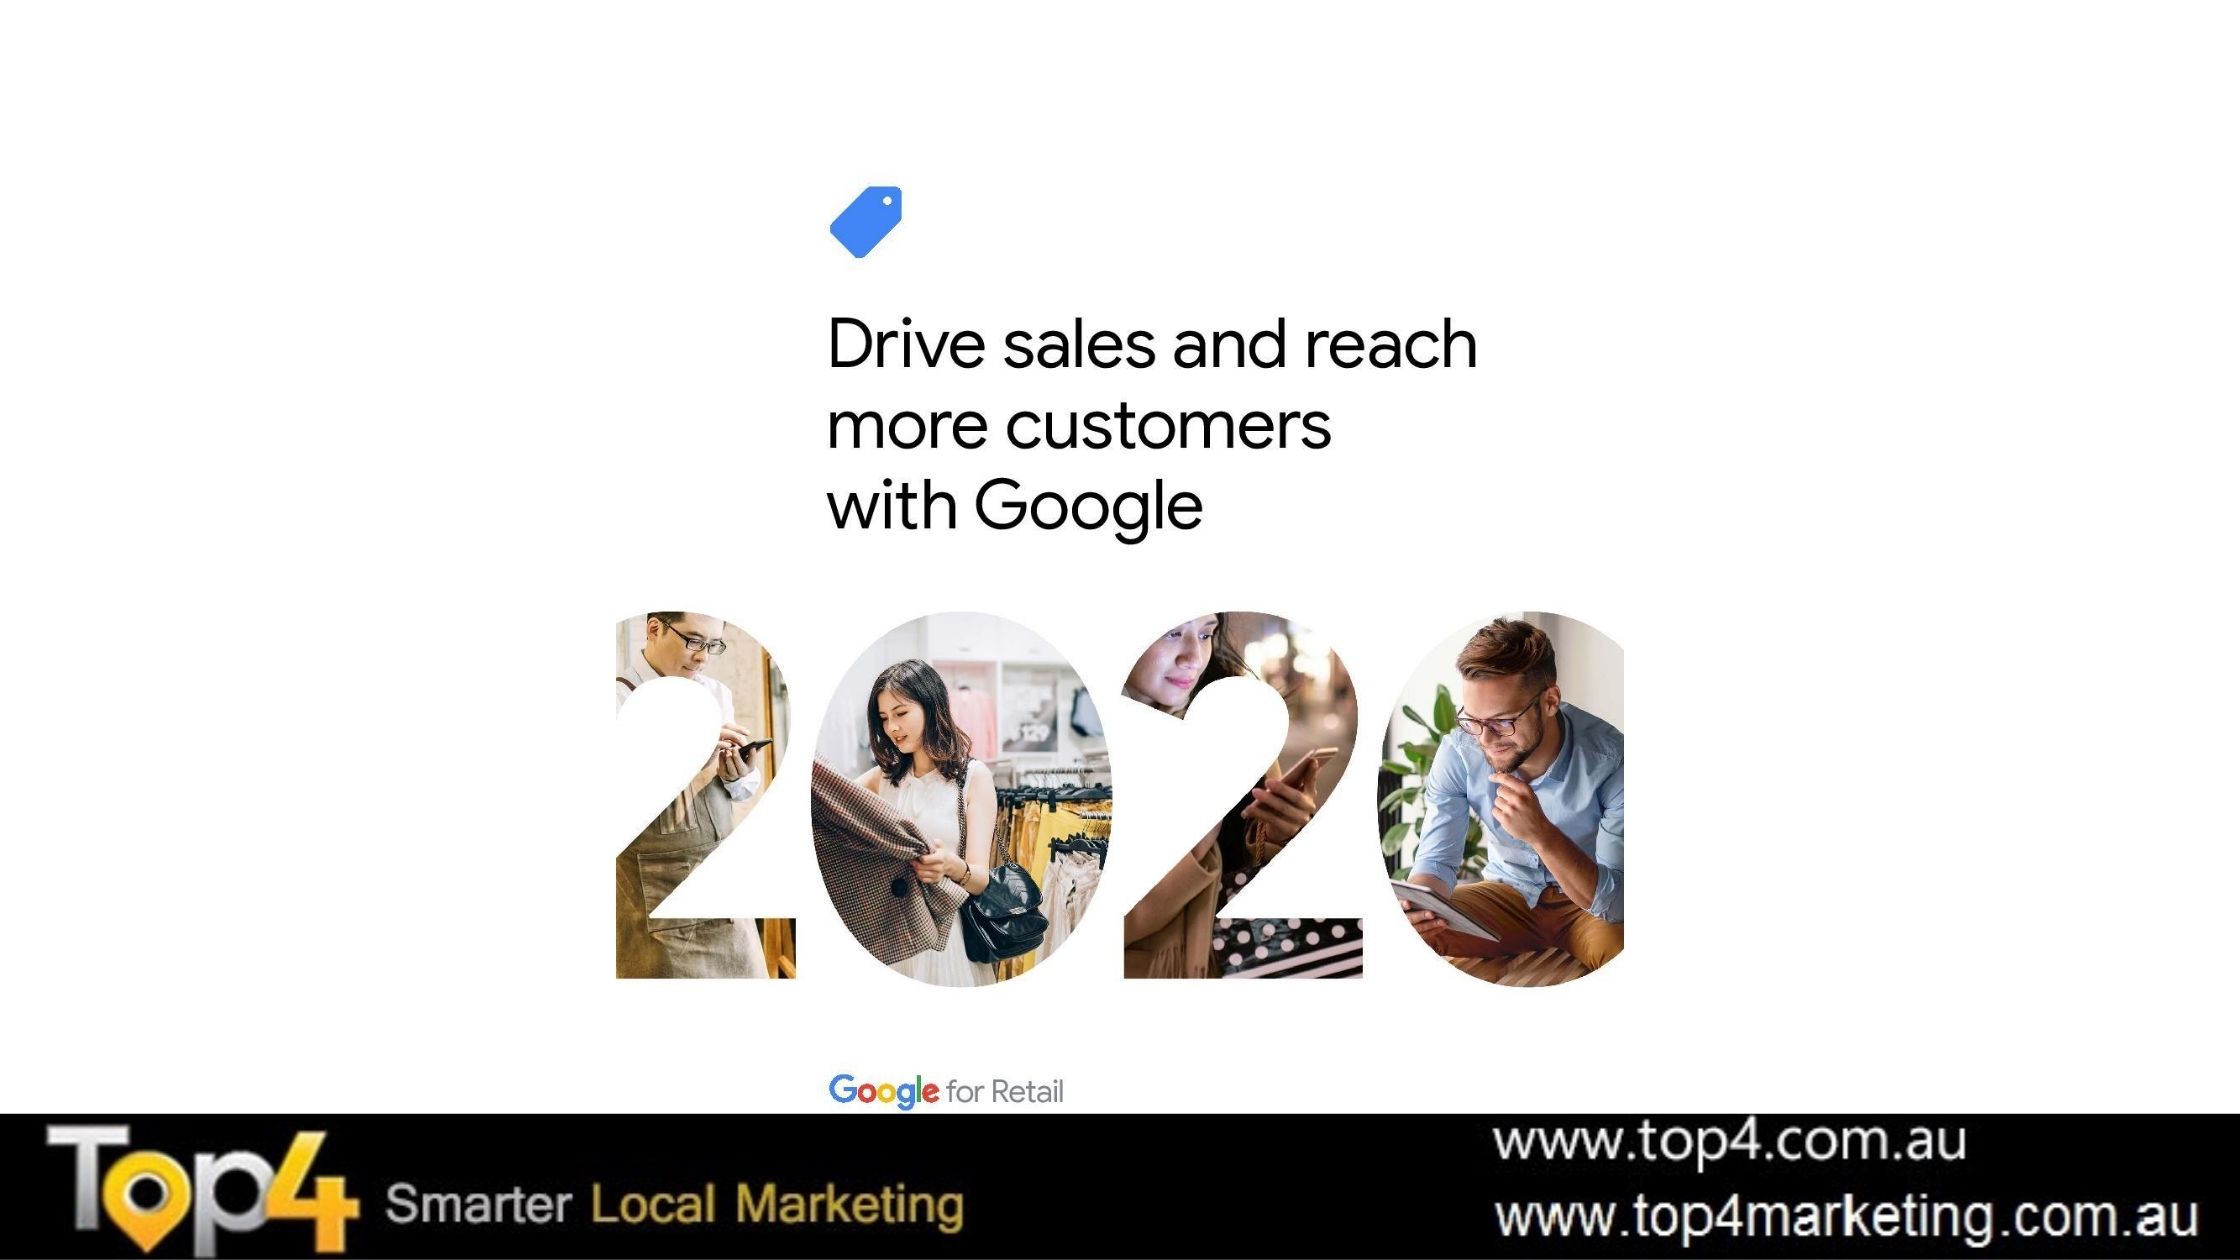 Guide for Retailers - Top4 Marketing